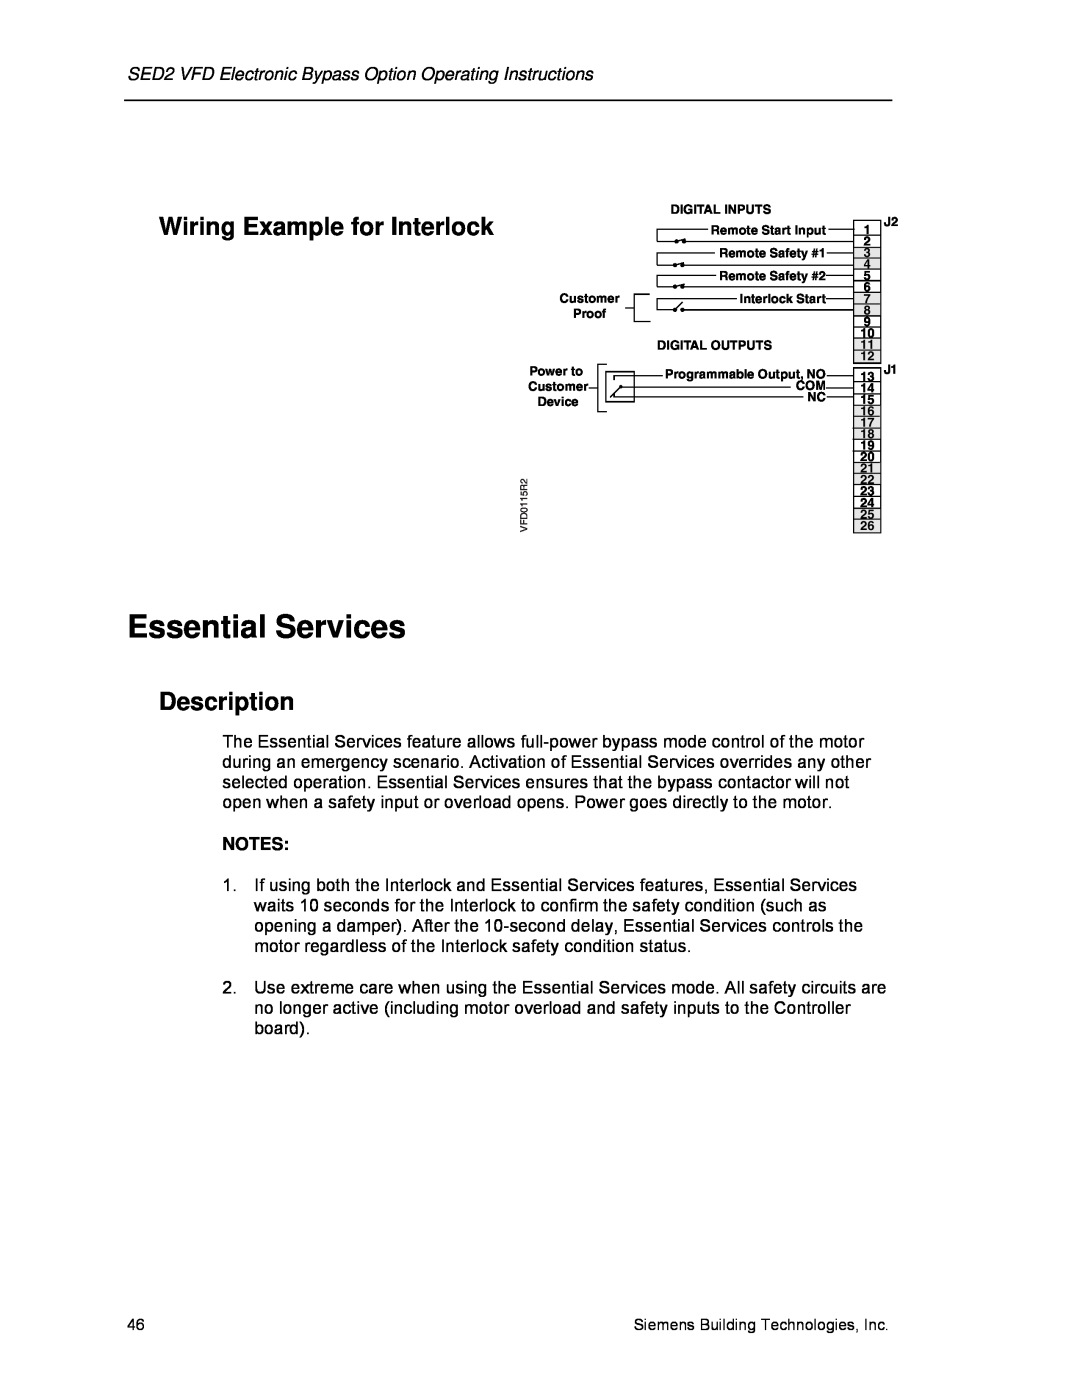 Siemens 125-3208 operating instructions Essential Services, Wiring Example for Interlock, Description 